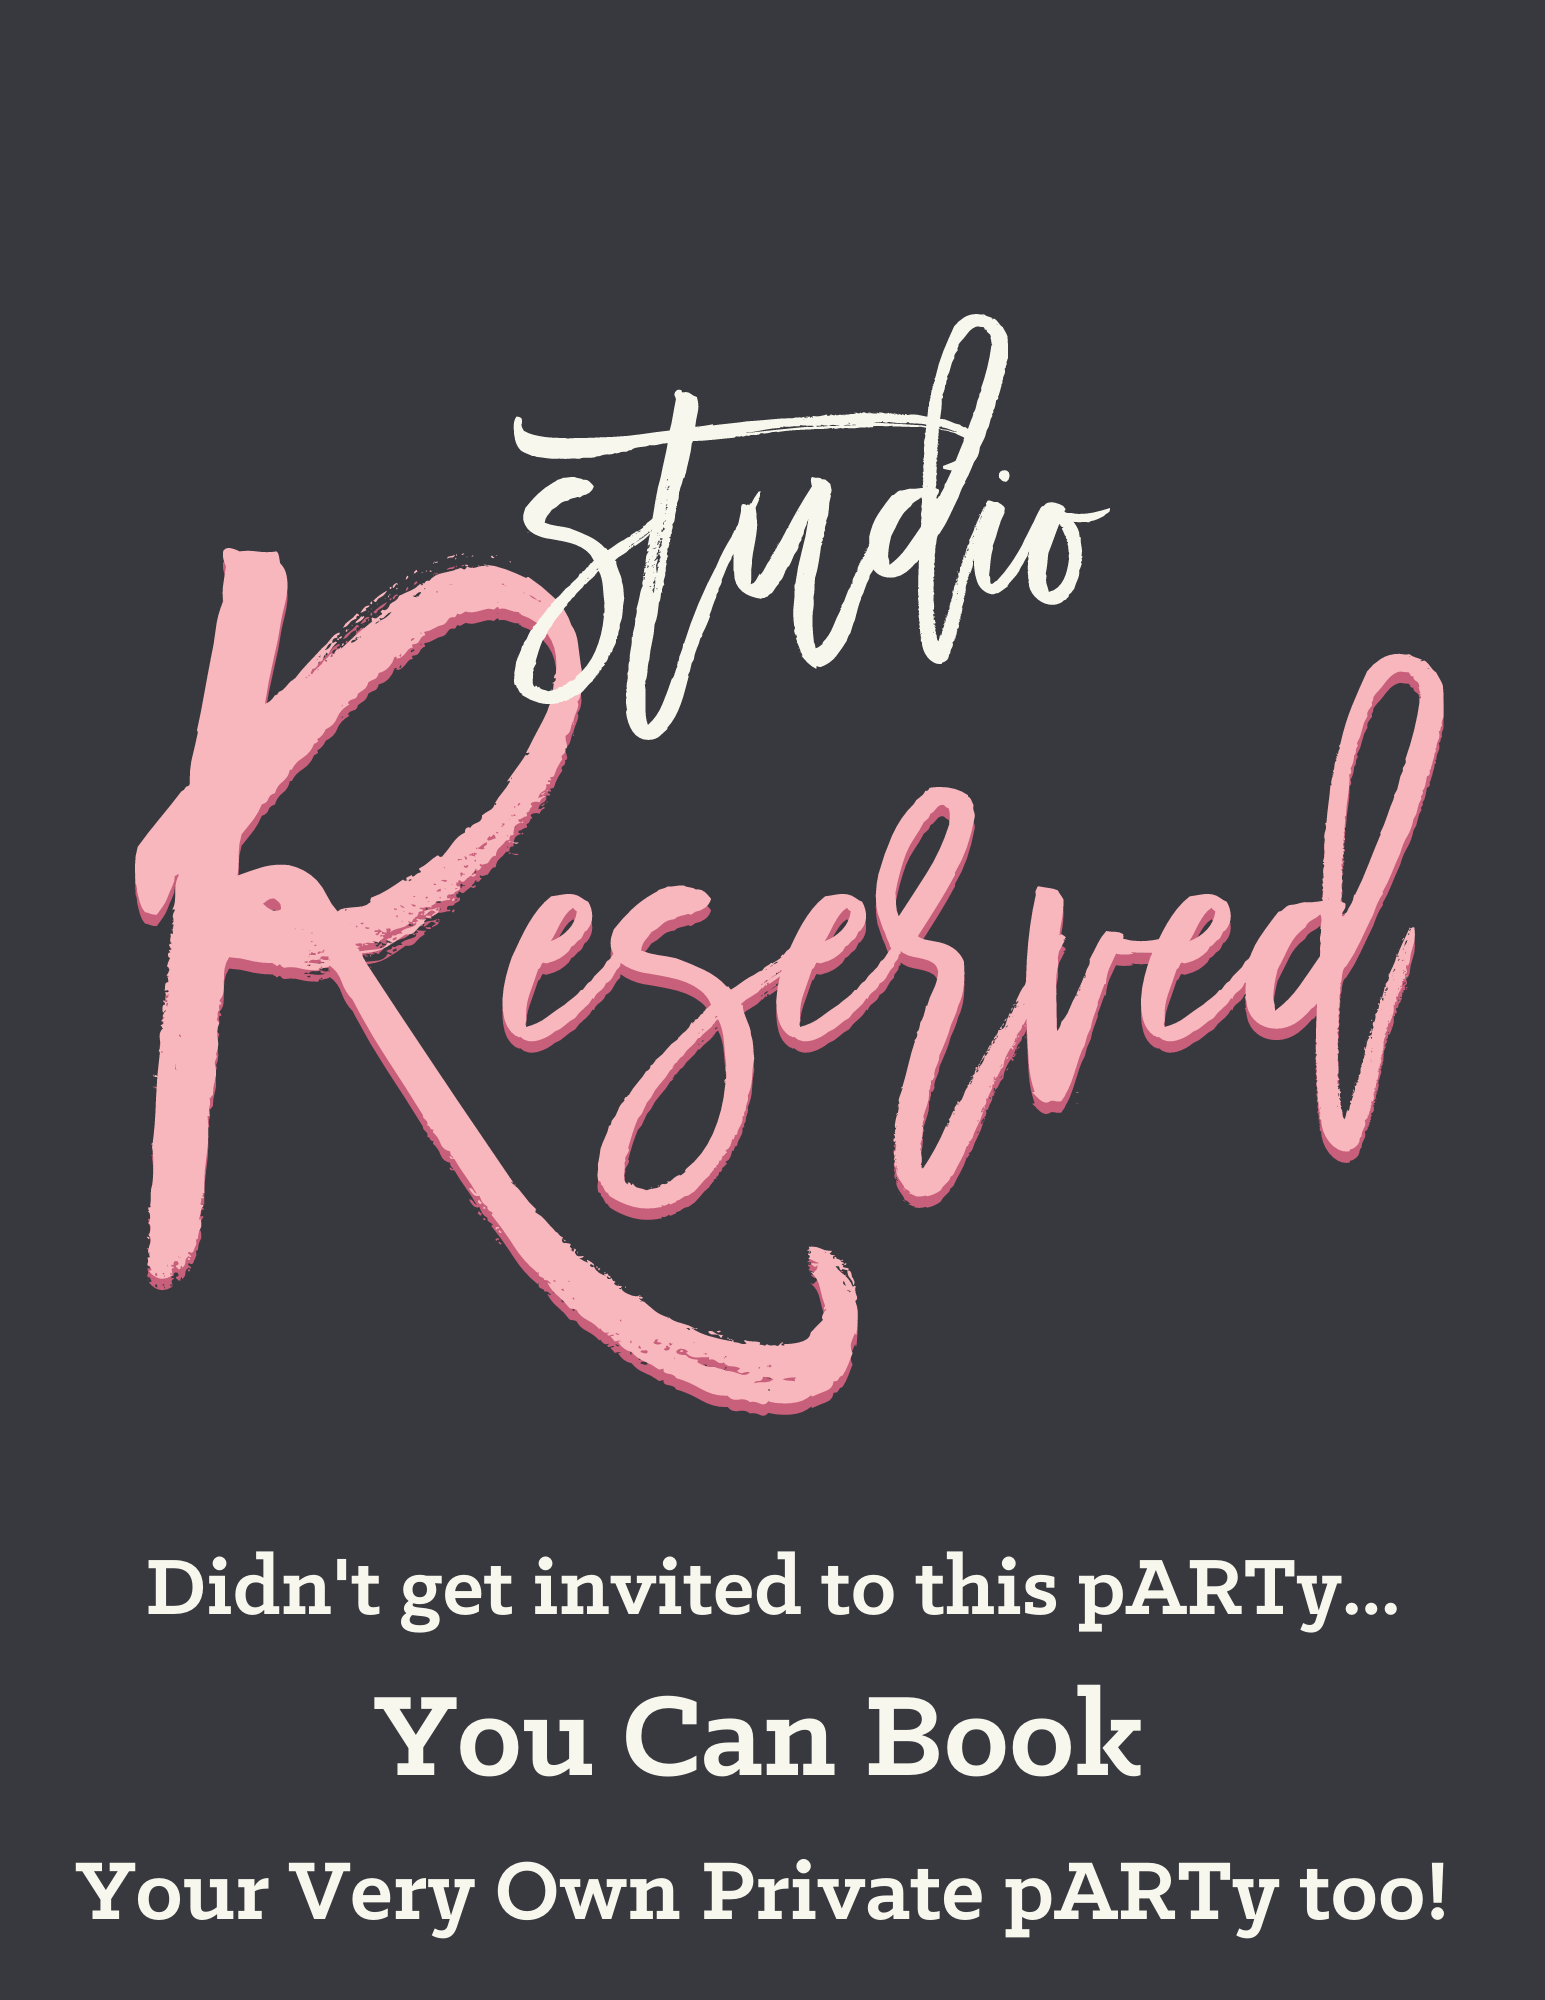 Studio Reserved for Private pARTy. Book Your Private pARTy With Us!